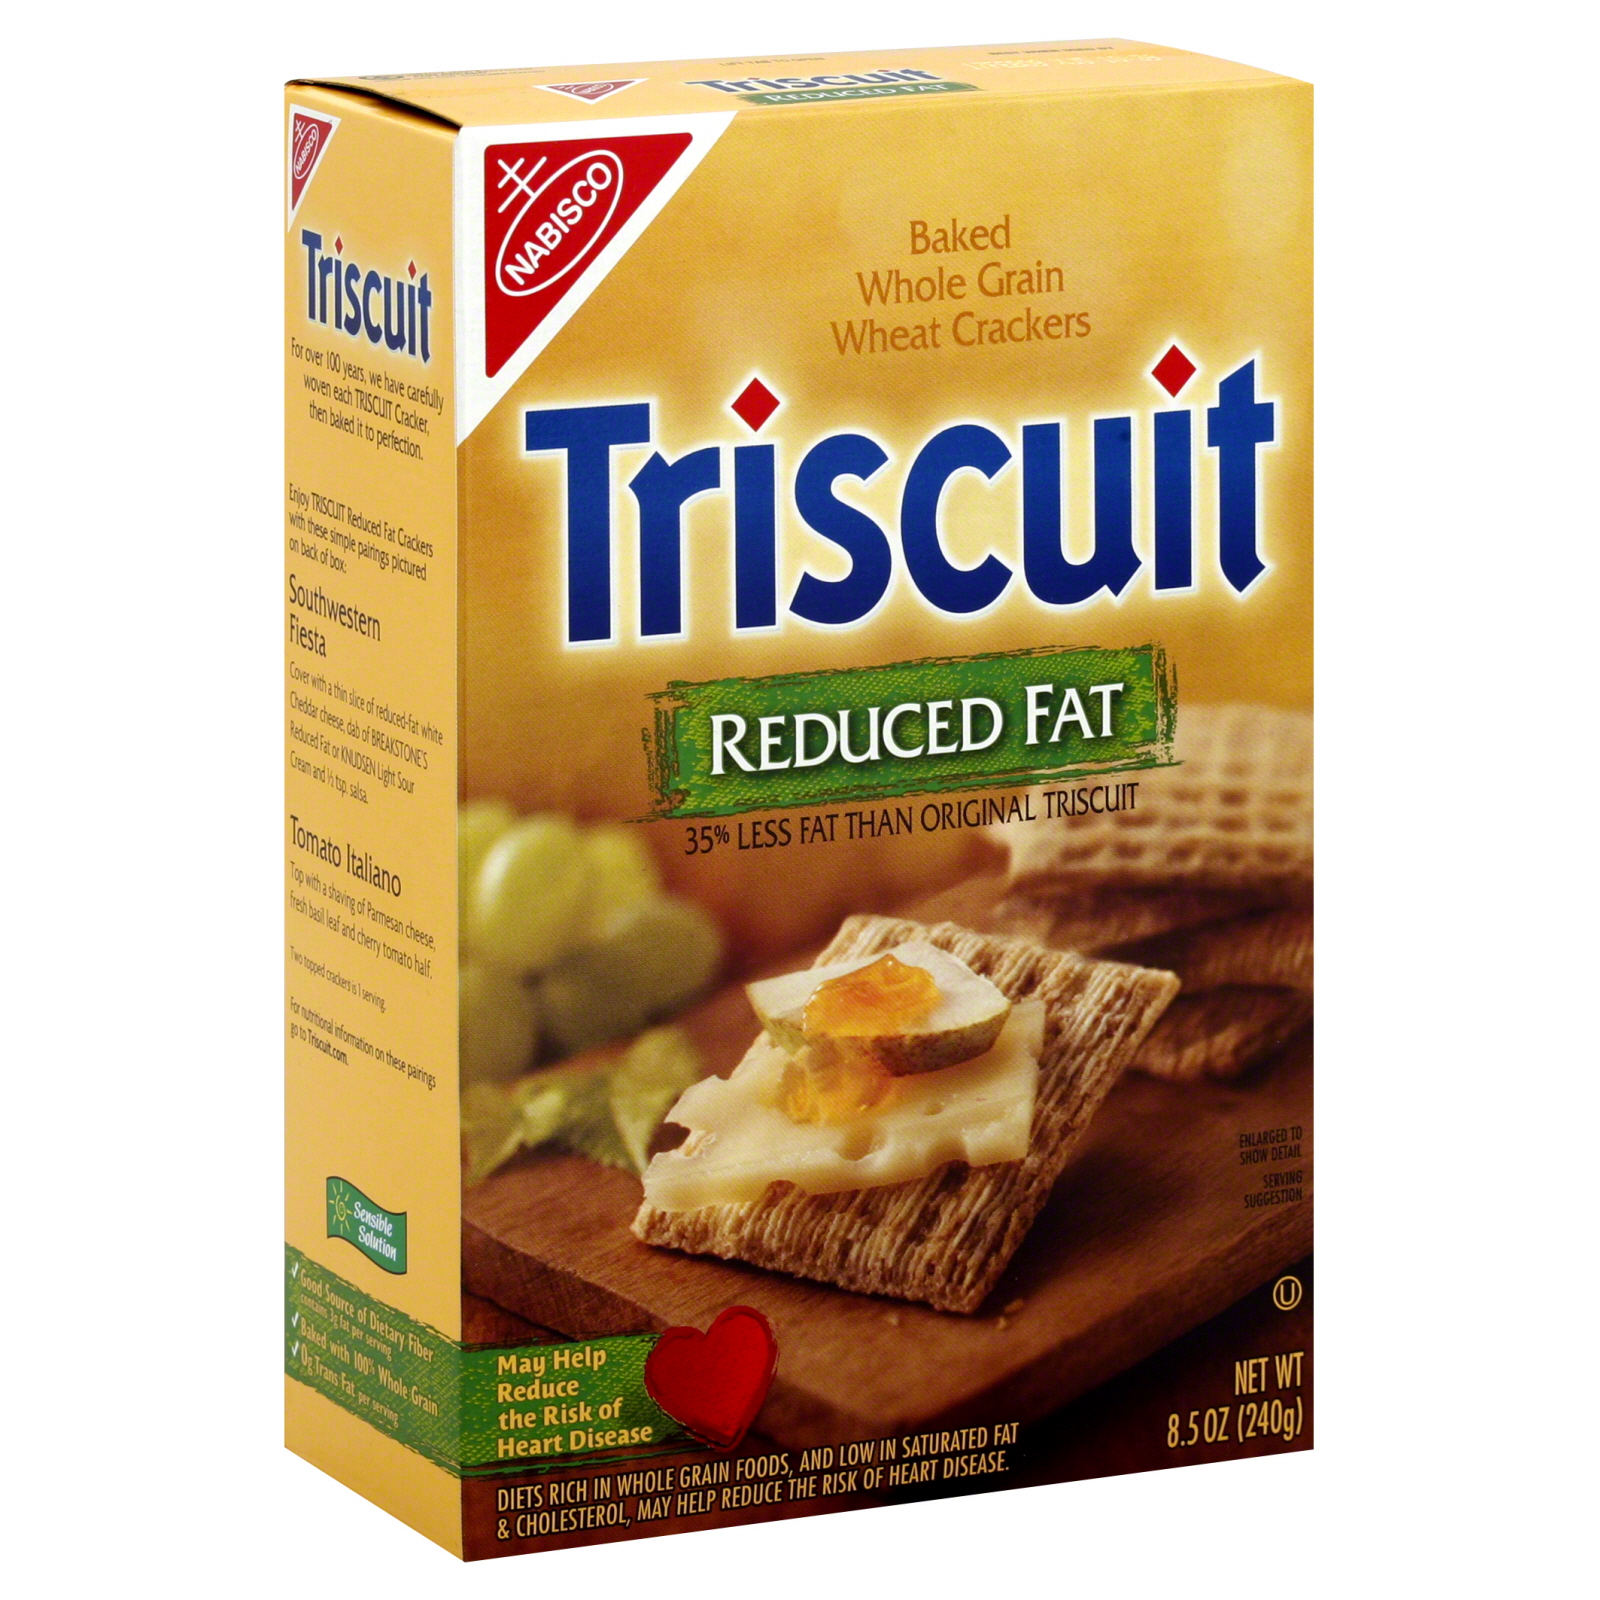 Triscuit Crackers, Reduced Fat, 8.5 oz (240 g)